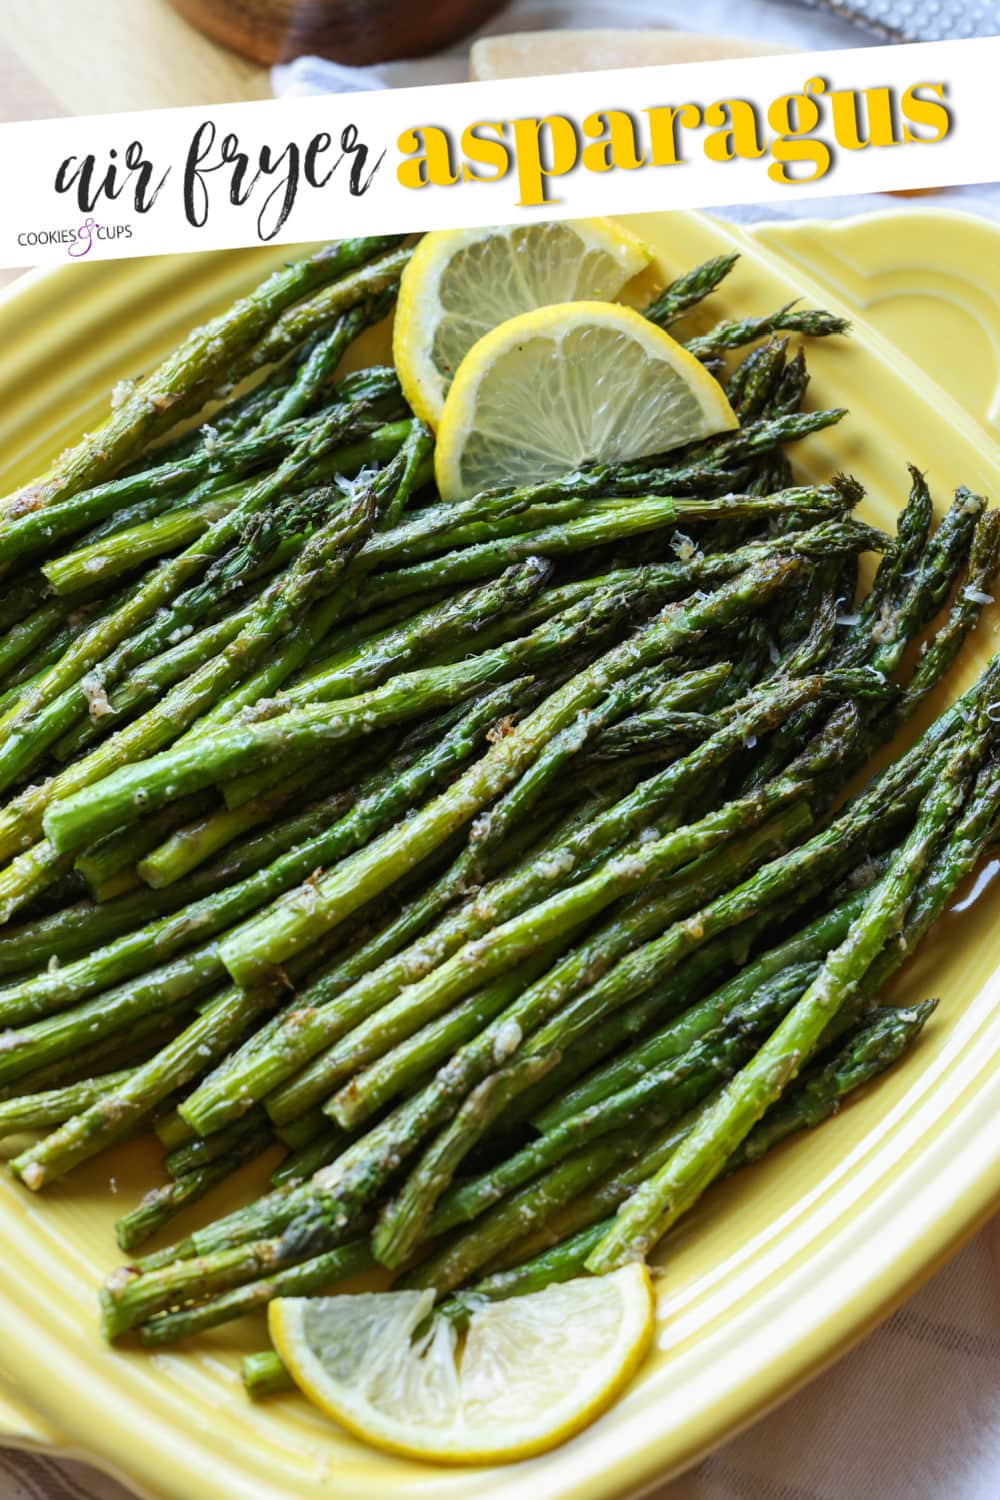 Roasted air fryer asparagus on a yellow square serving platter, garnished with lemon slices.